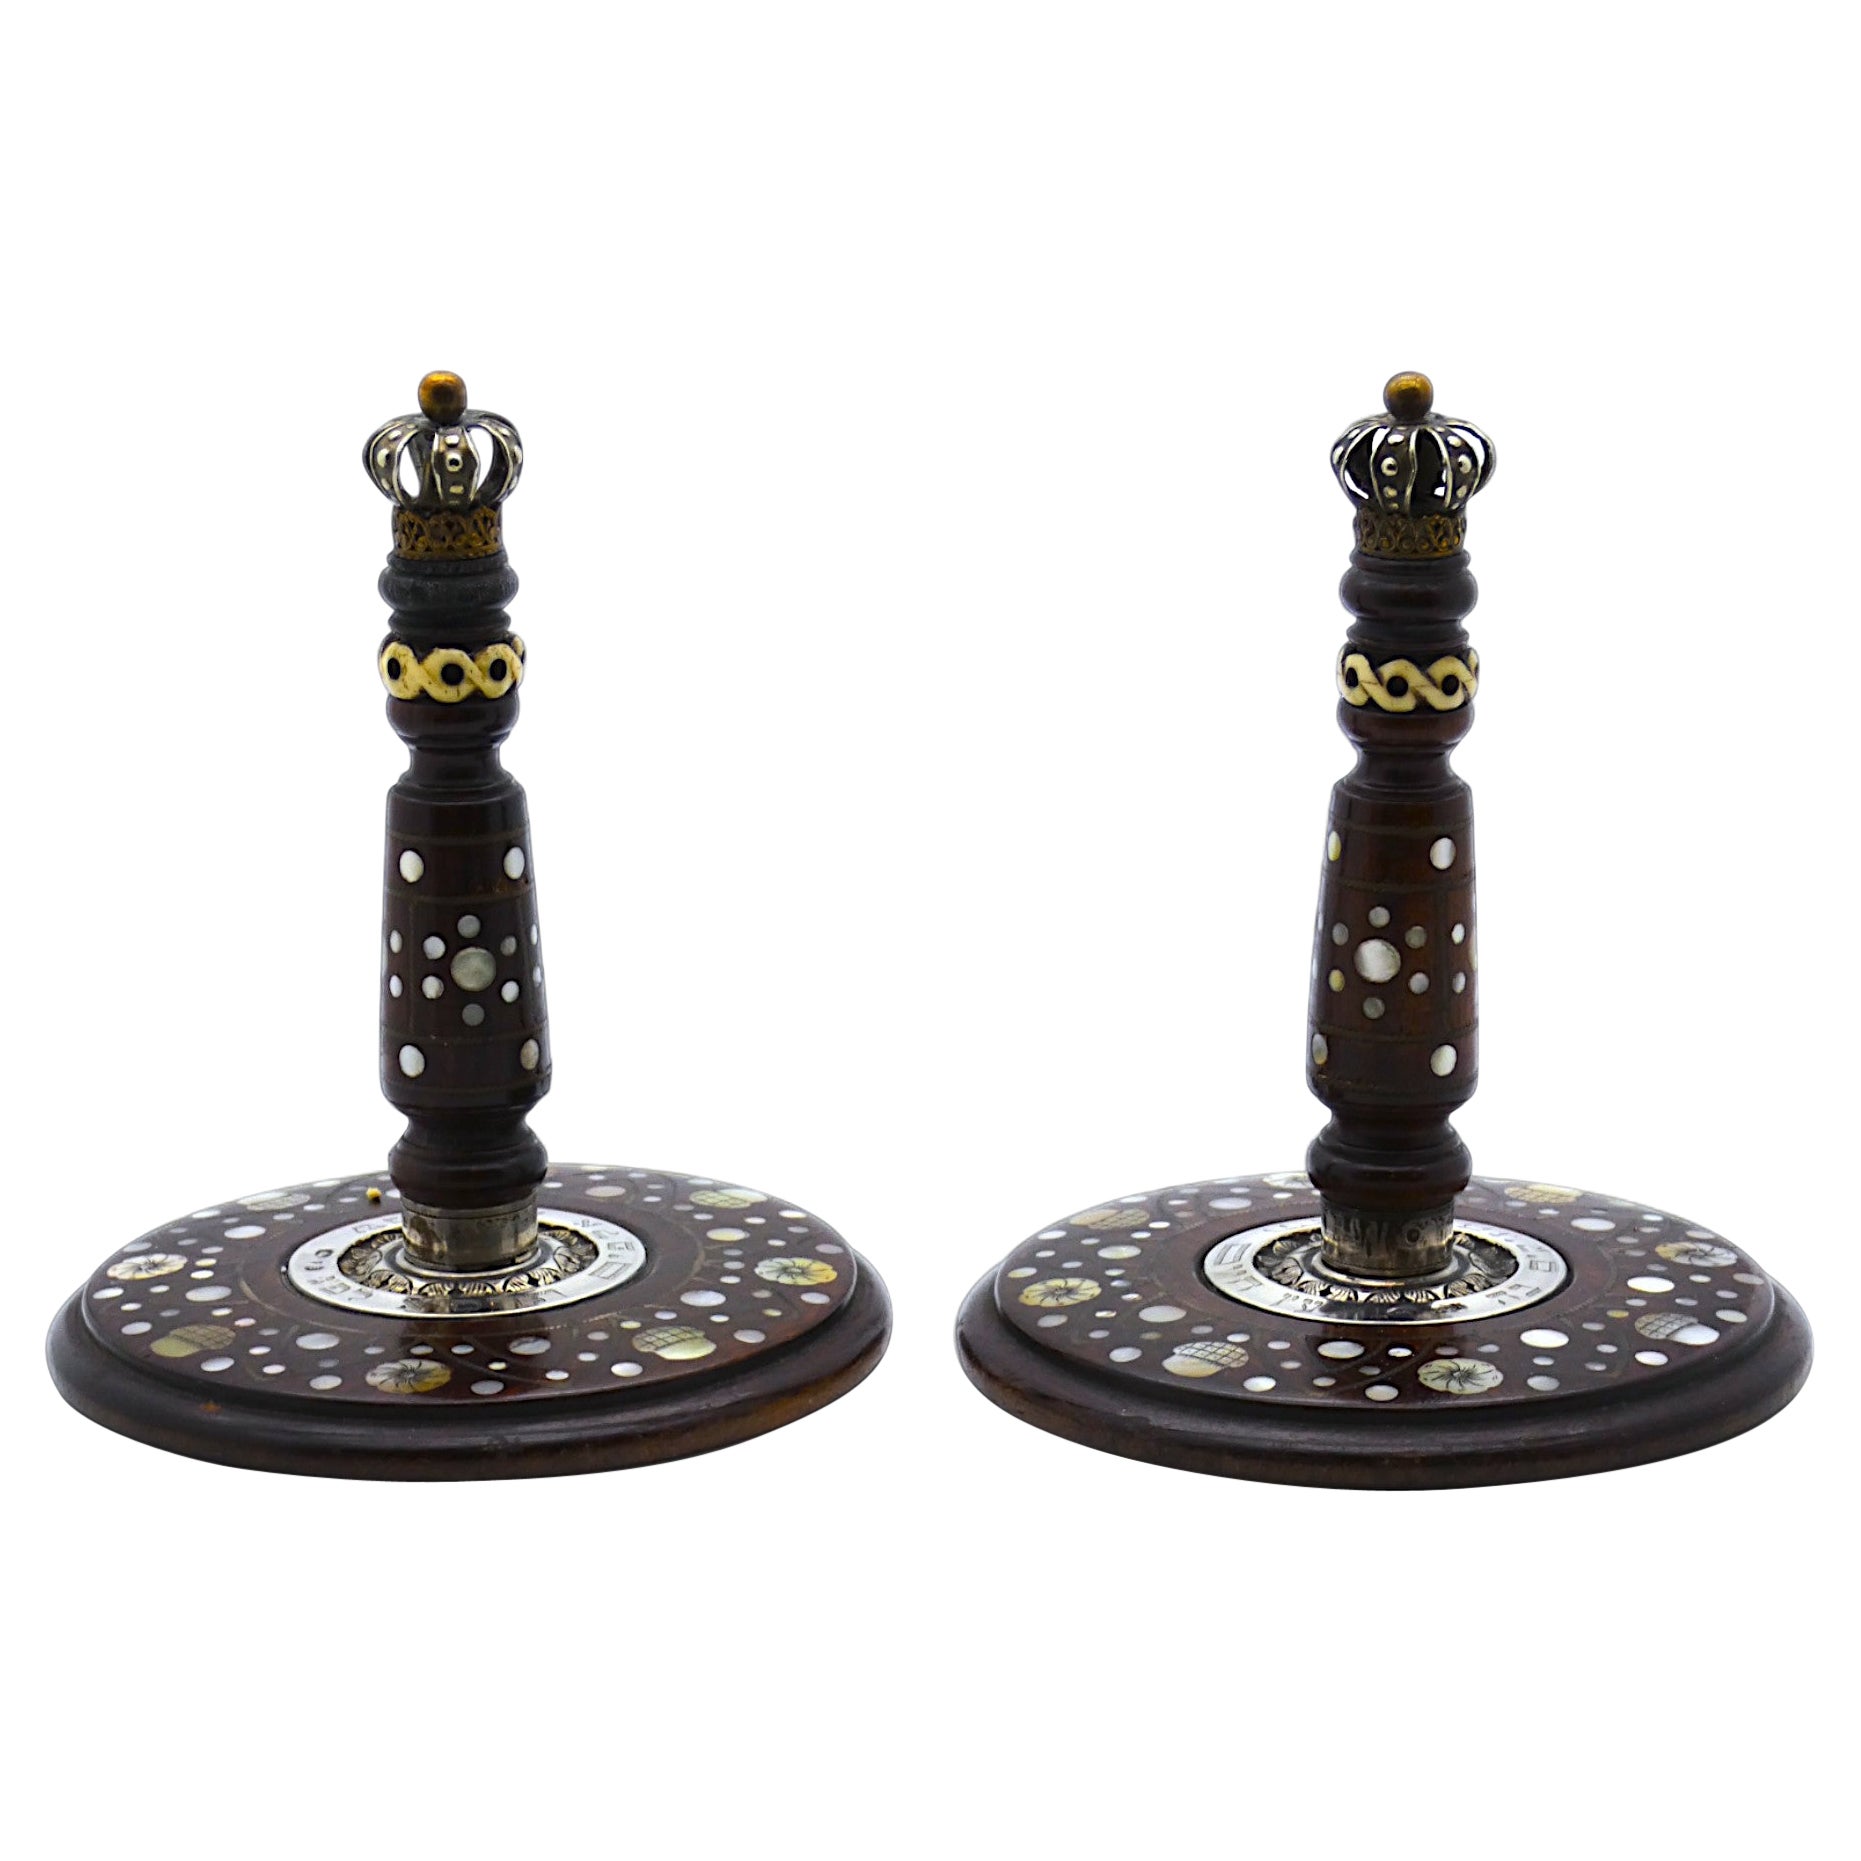 A Pair of Carved Wood, Mother of Pearl and Silver Atzei Chaim , Poland 1901